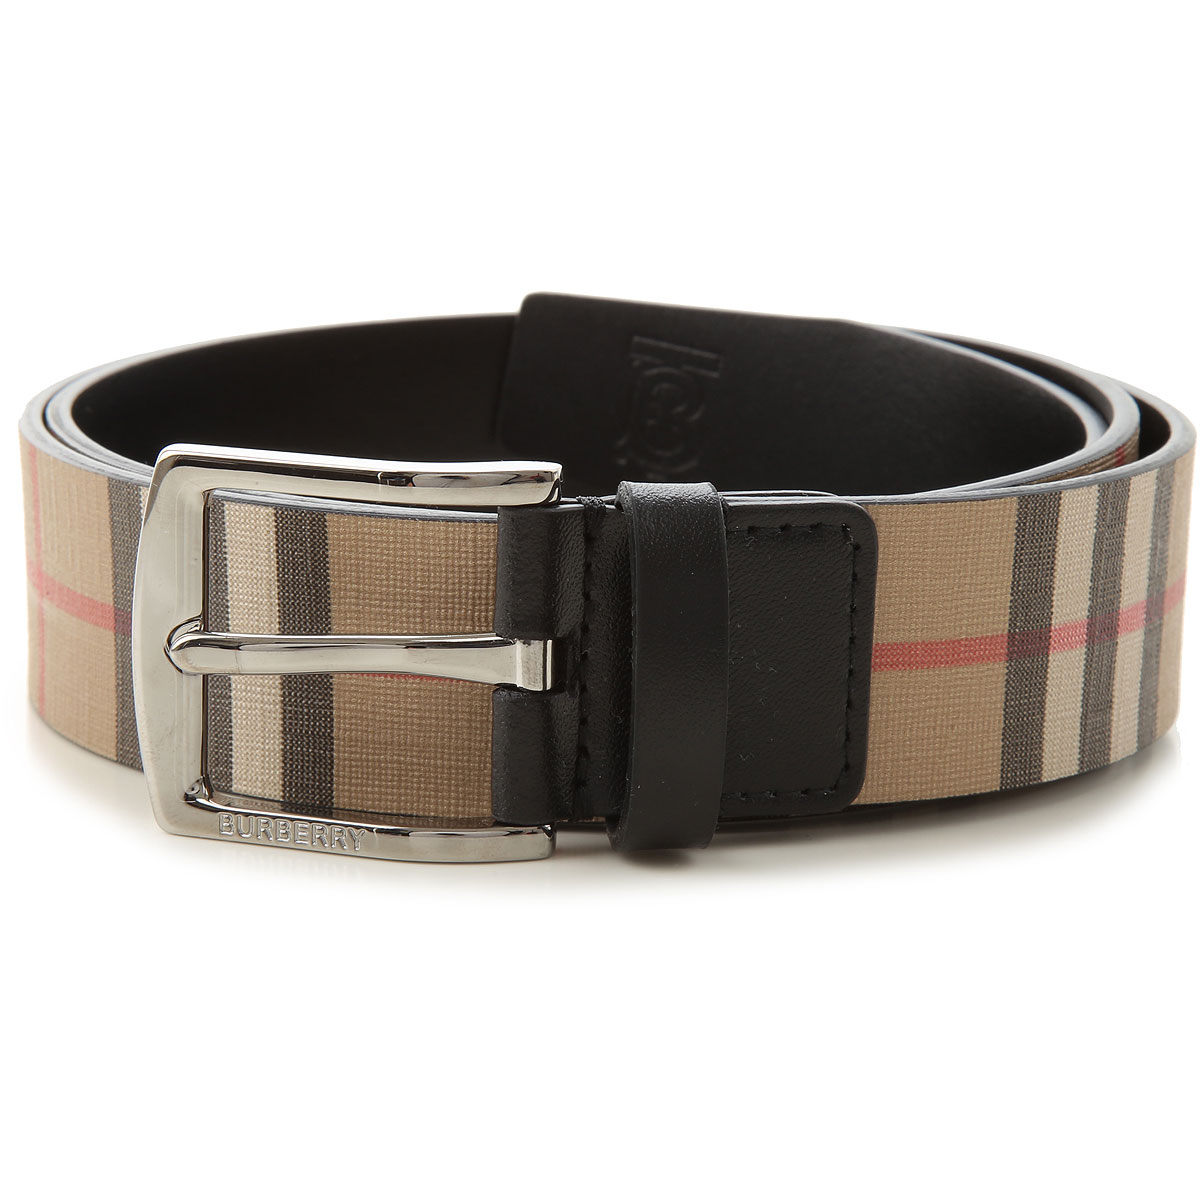 Mens Belts Burberry, Style code: 8025675-a7026-